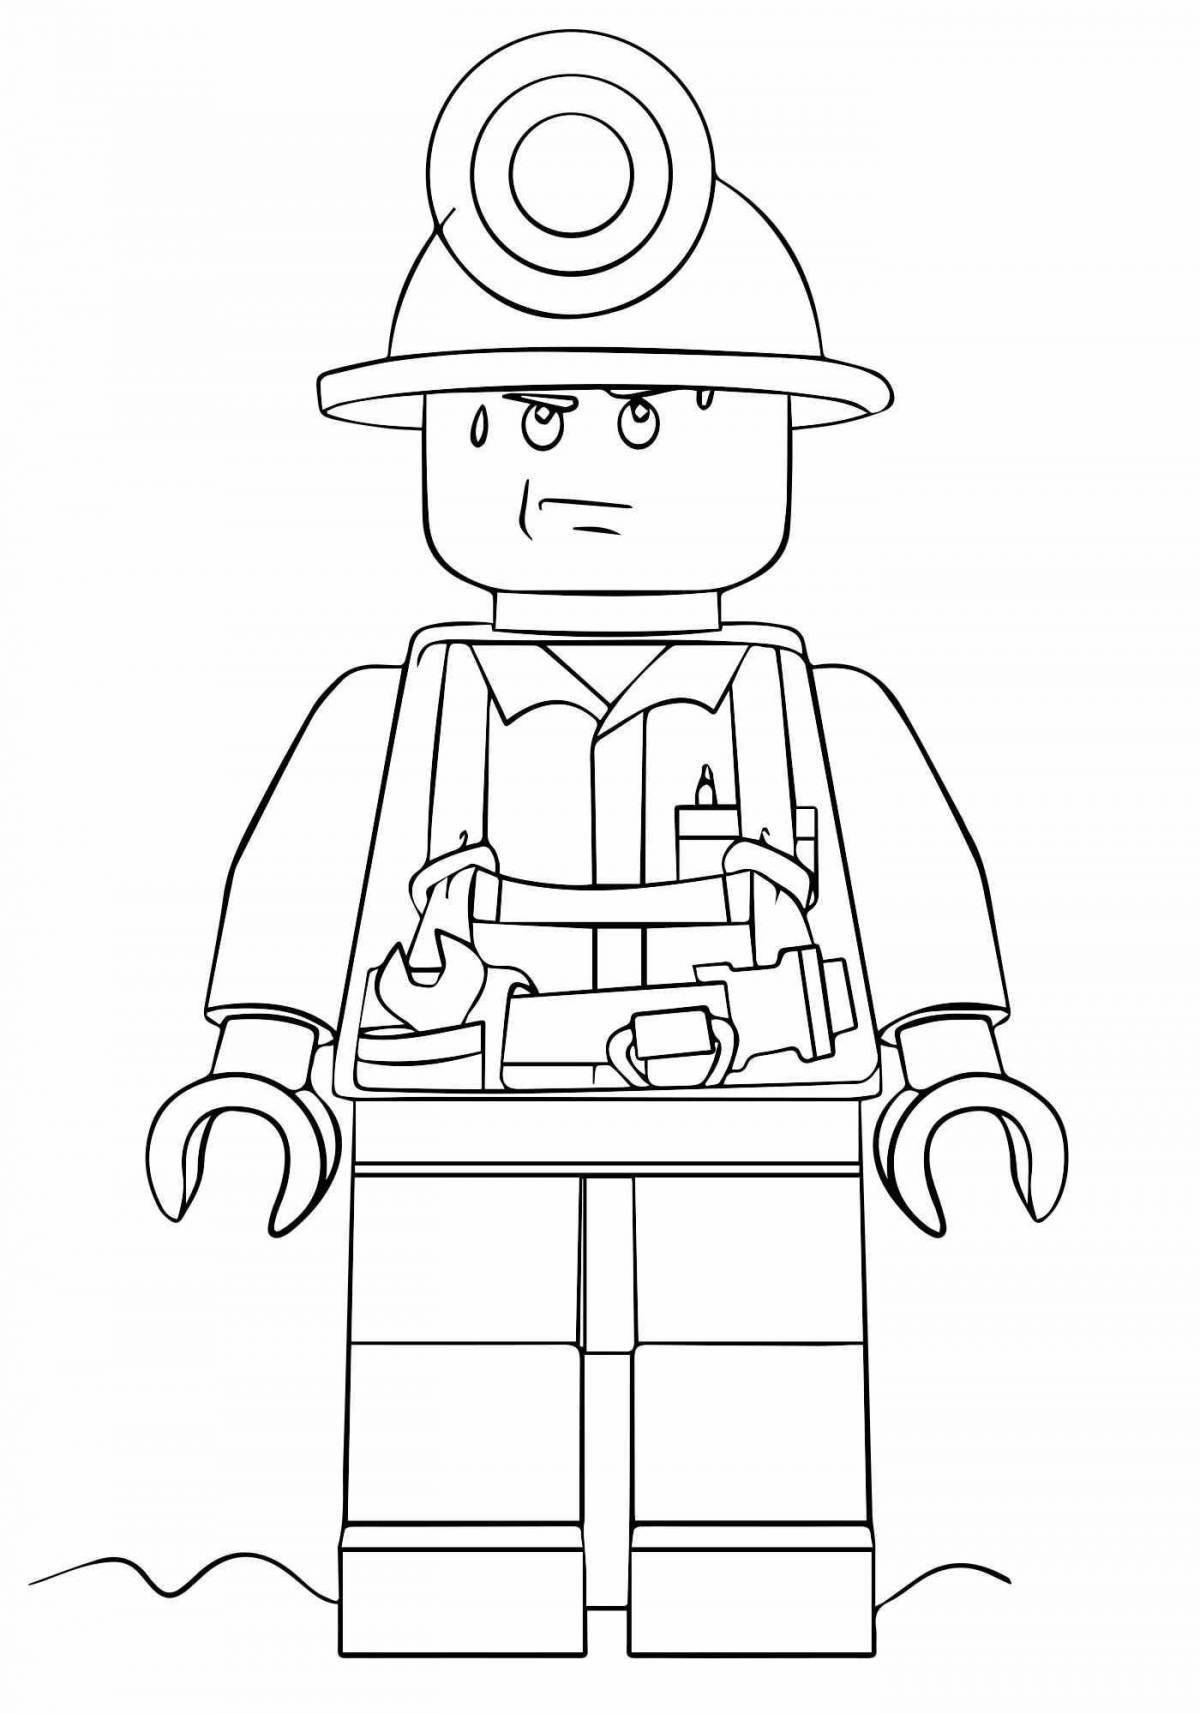 Cute lego police coloring page